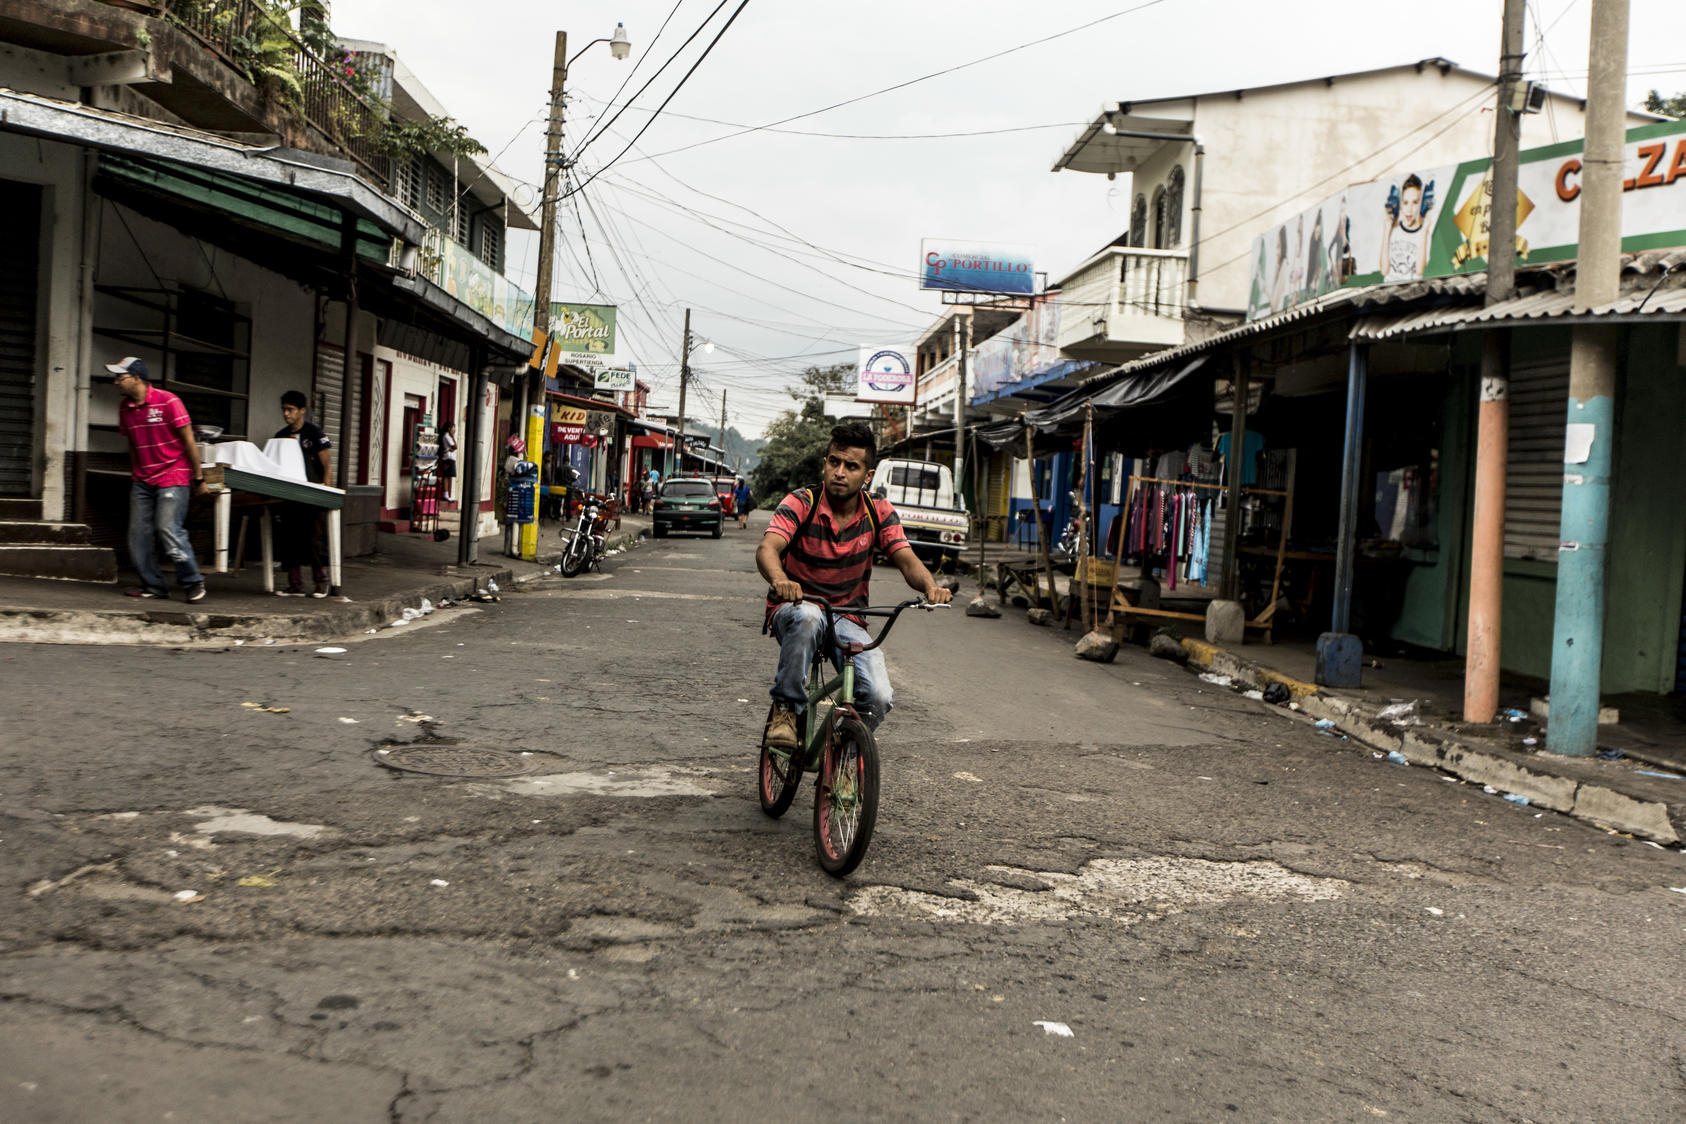 A bicyclist in Berlín, a town in El Salvador where gangs are somewhat less of a problem than in the larger cities